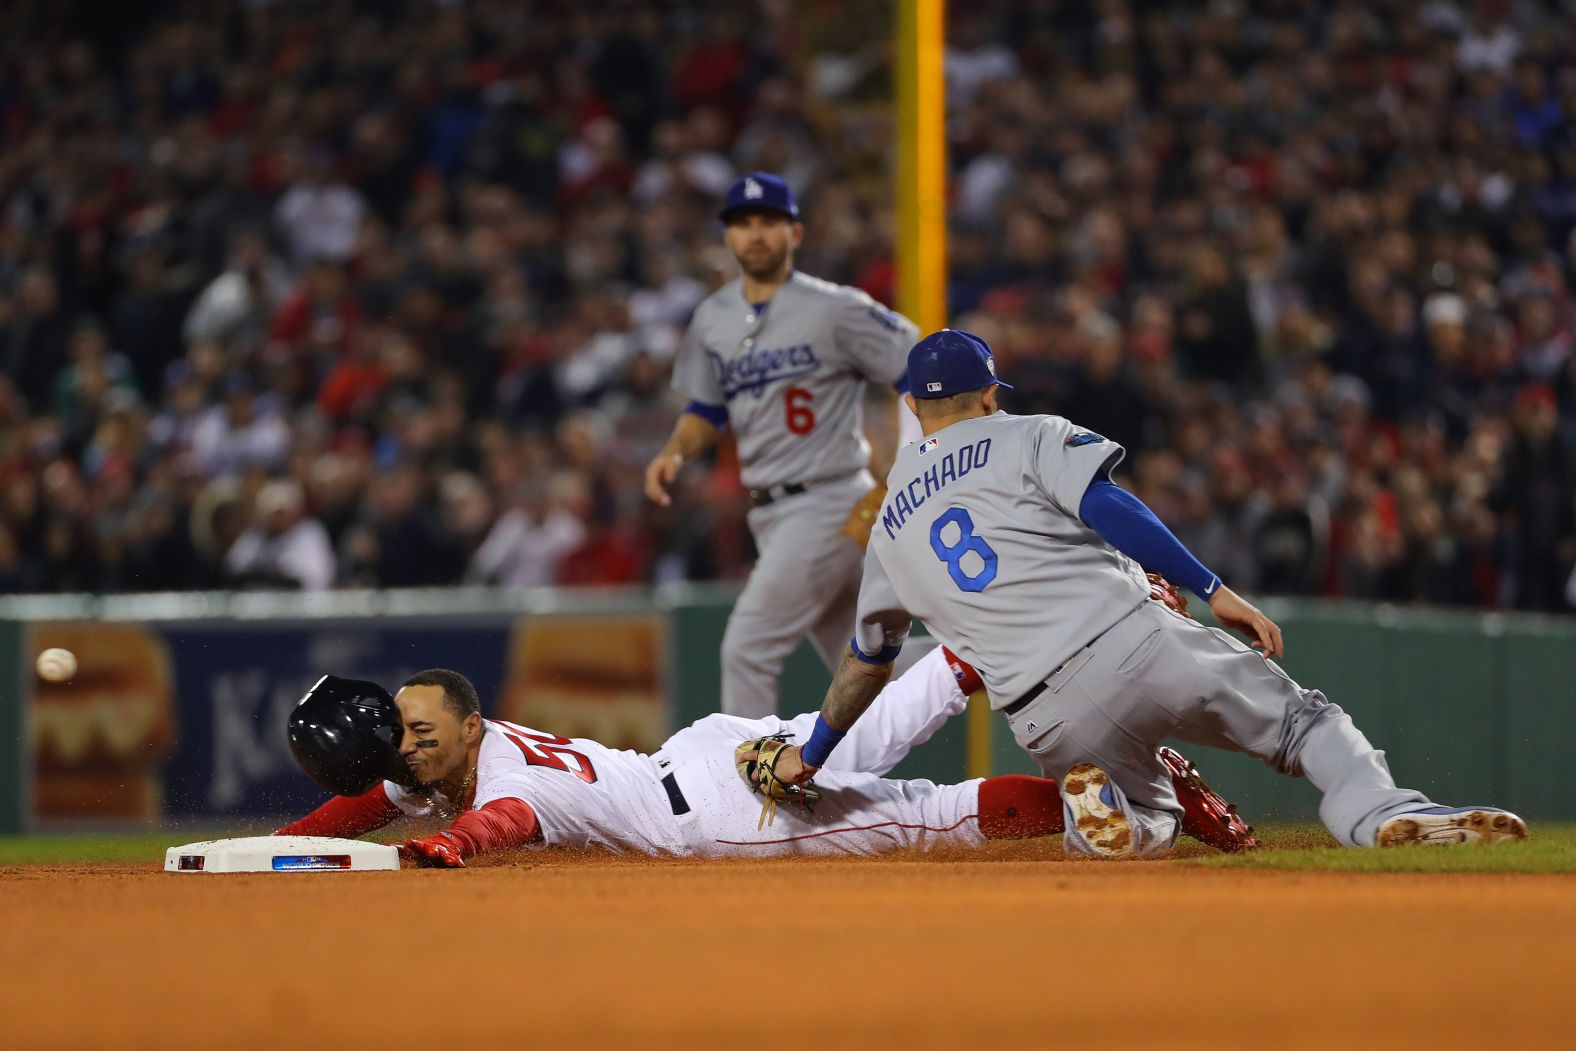 Mookie Betts of the Boston Red Sox steals second base ahead of the tag from Manny Machado of the Los Angeles Dodgers in the first inning of Game 1.  As part of Taco Bell's "Steal a Base, Steal a Taco" promotion, Betts' stolen base won everyone in America a free Doritos Locos Taco redeemable on November 1.